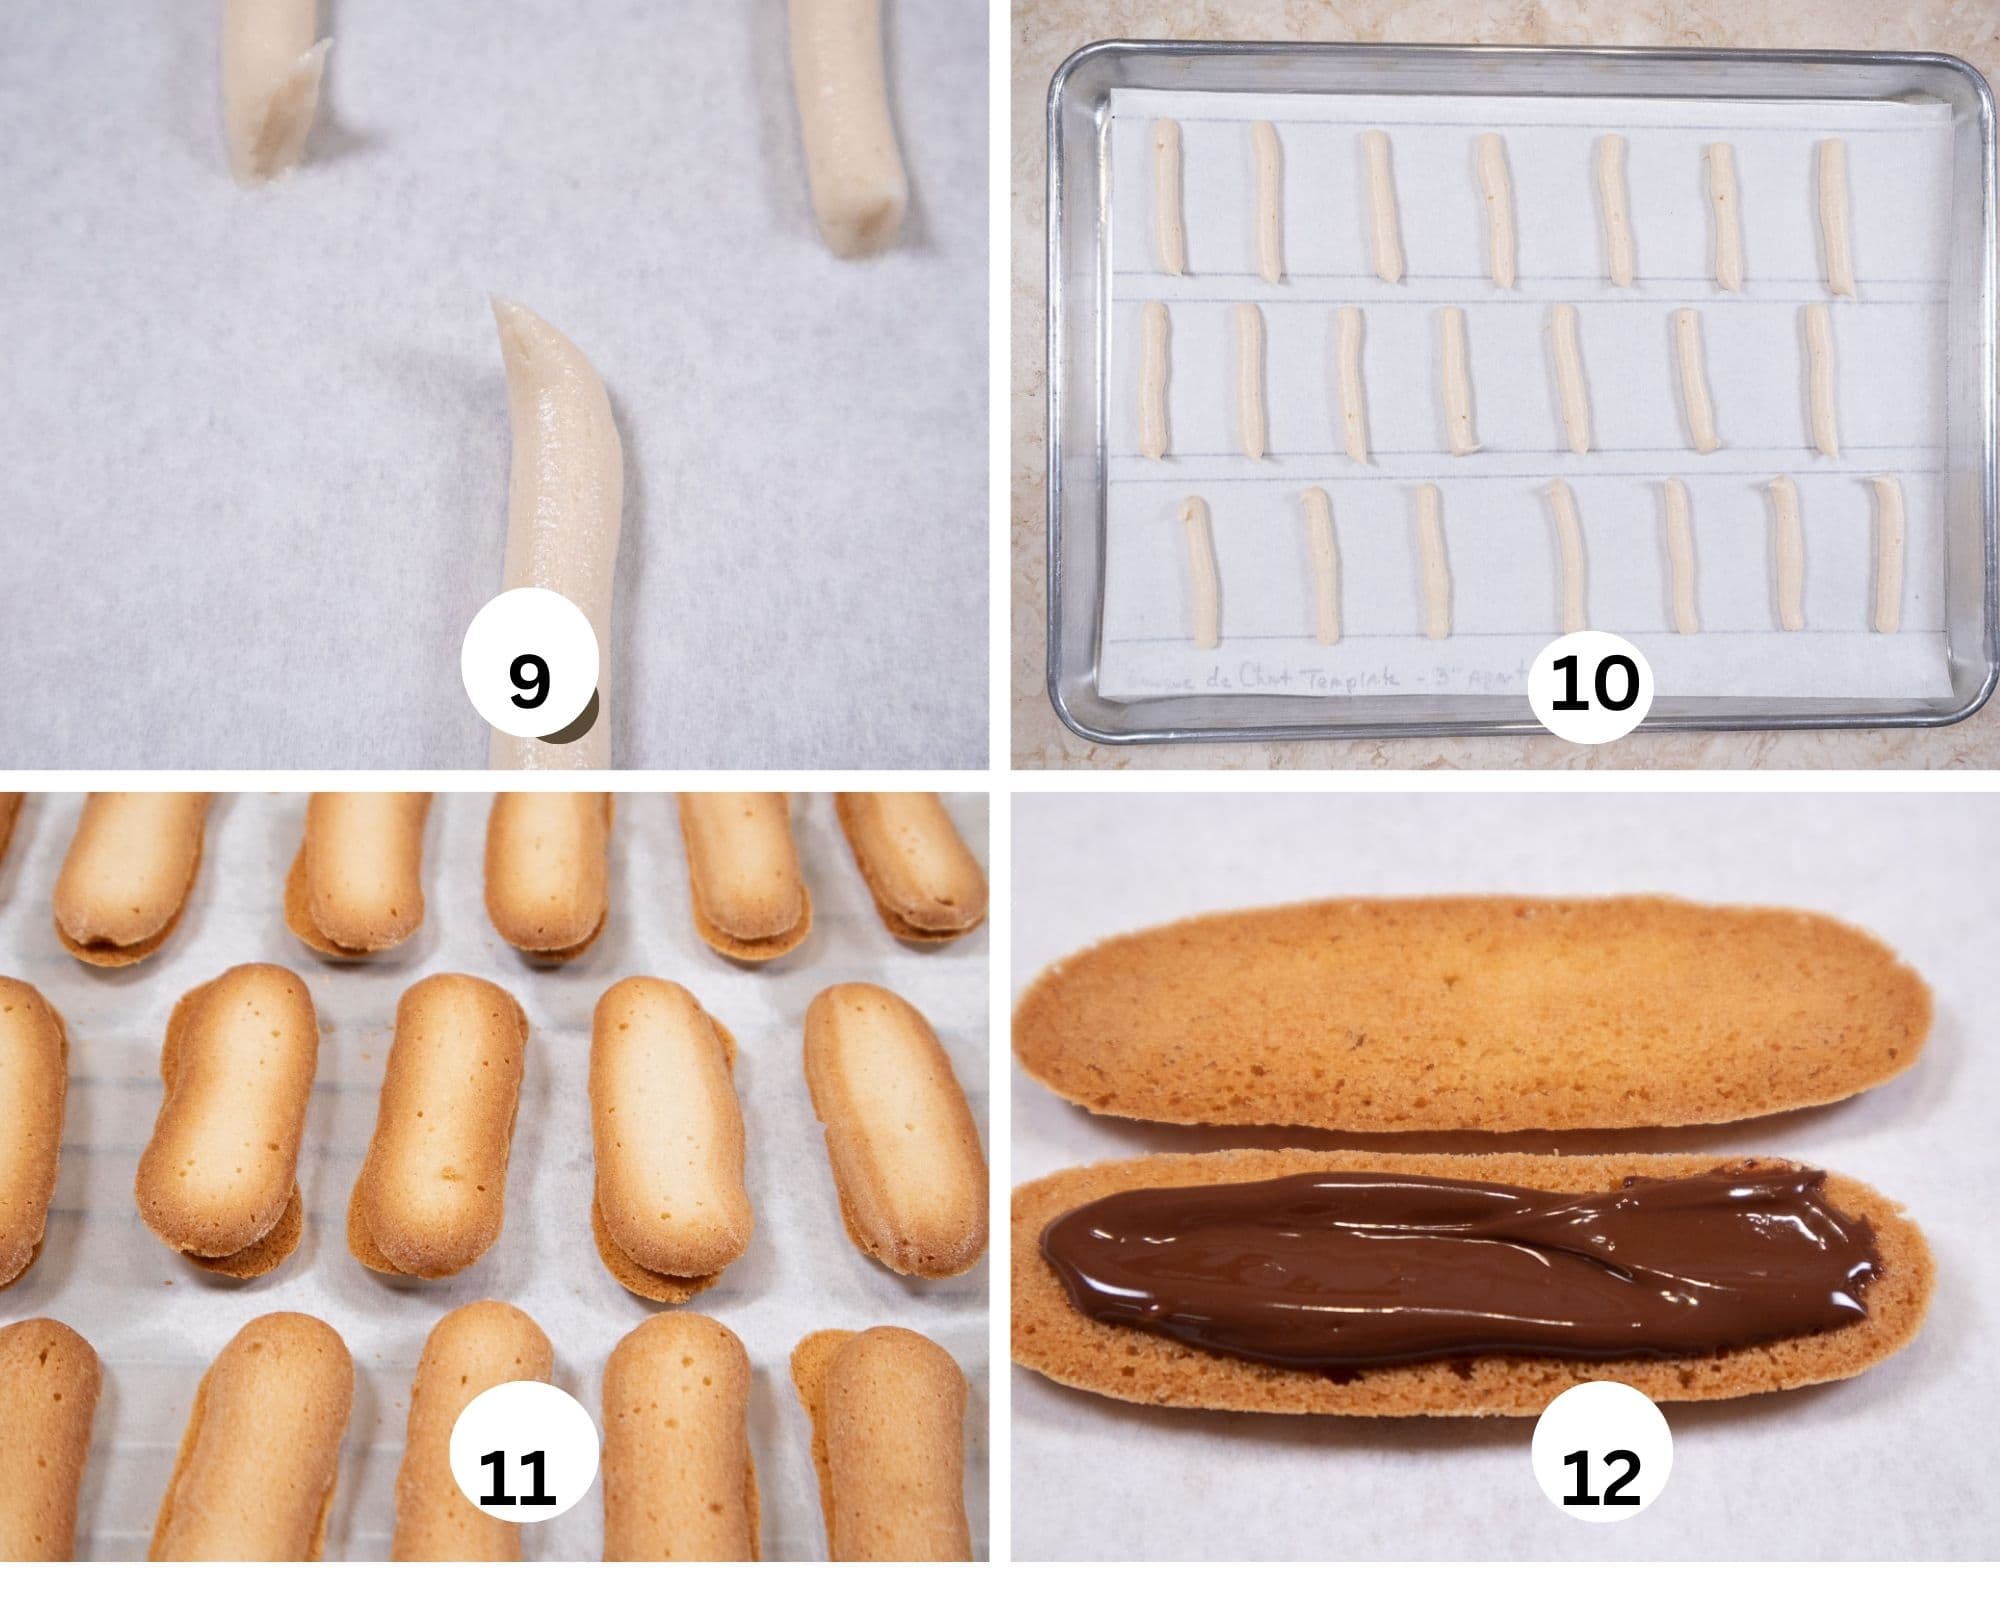 This last collage shows the tip of the piped batter, the cookies unbaked, baked and one being covered with chocolate.